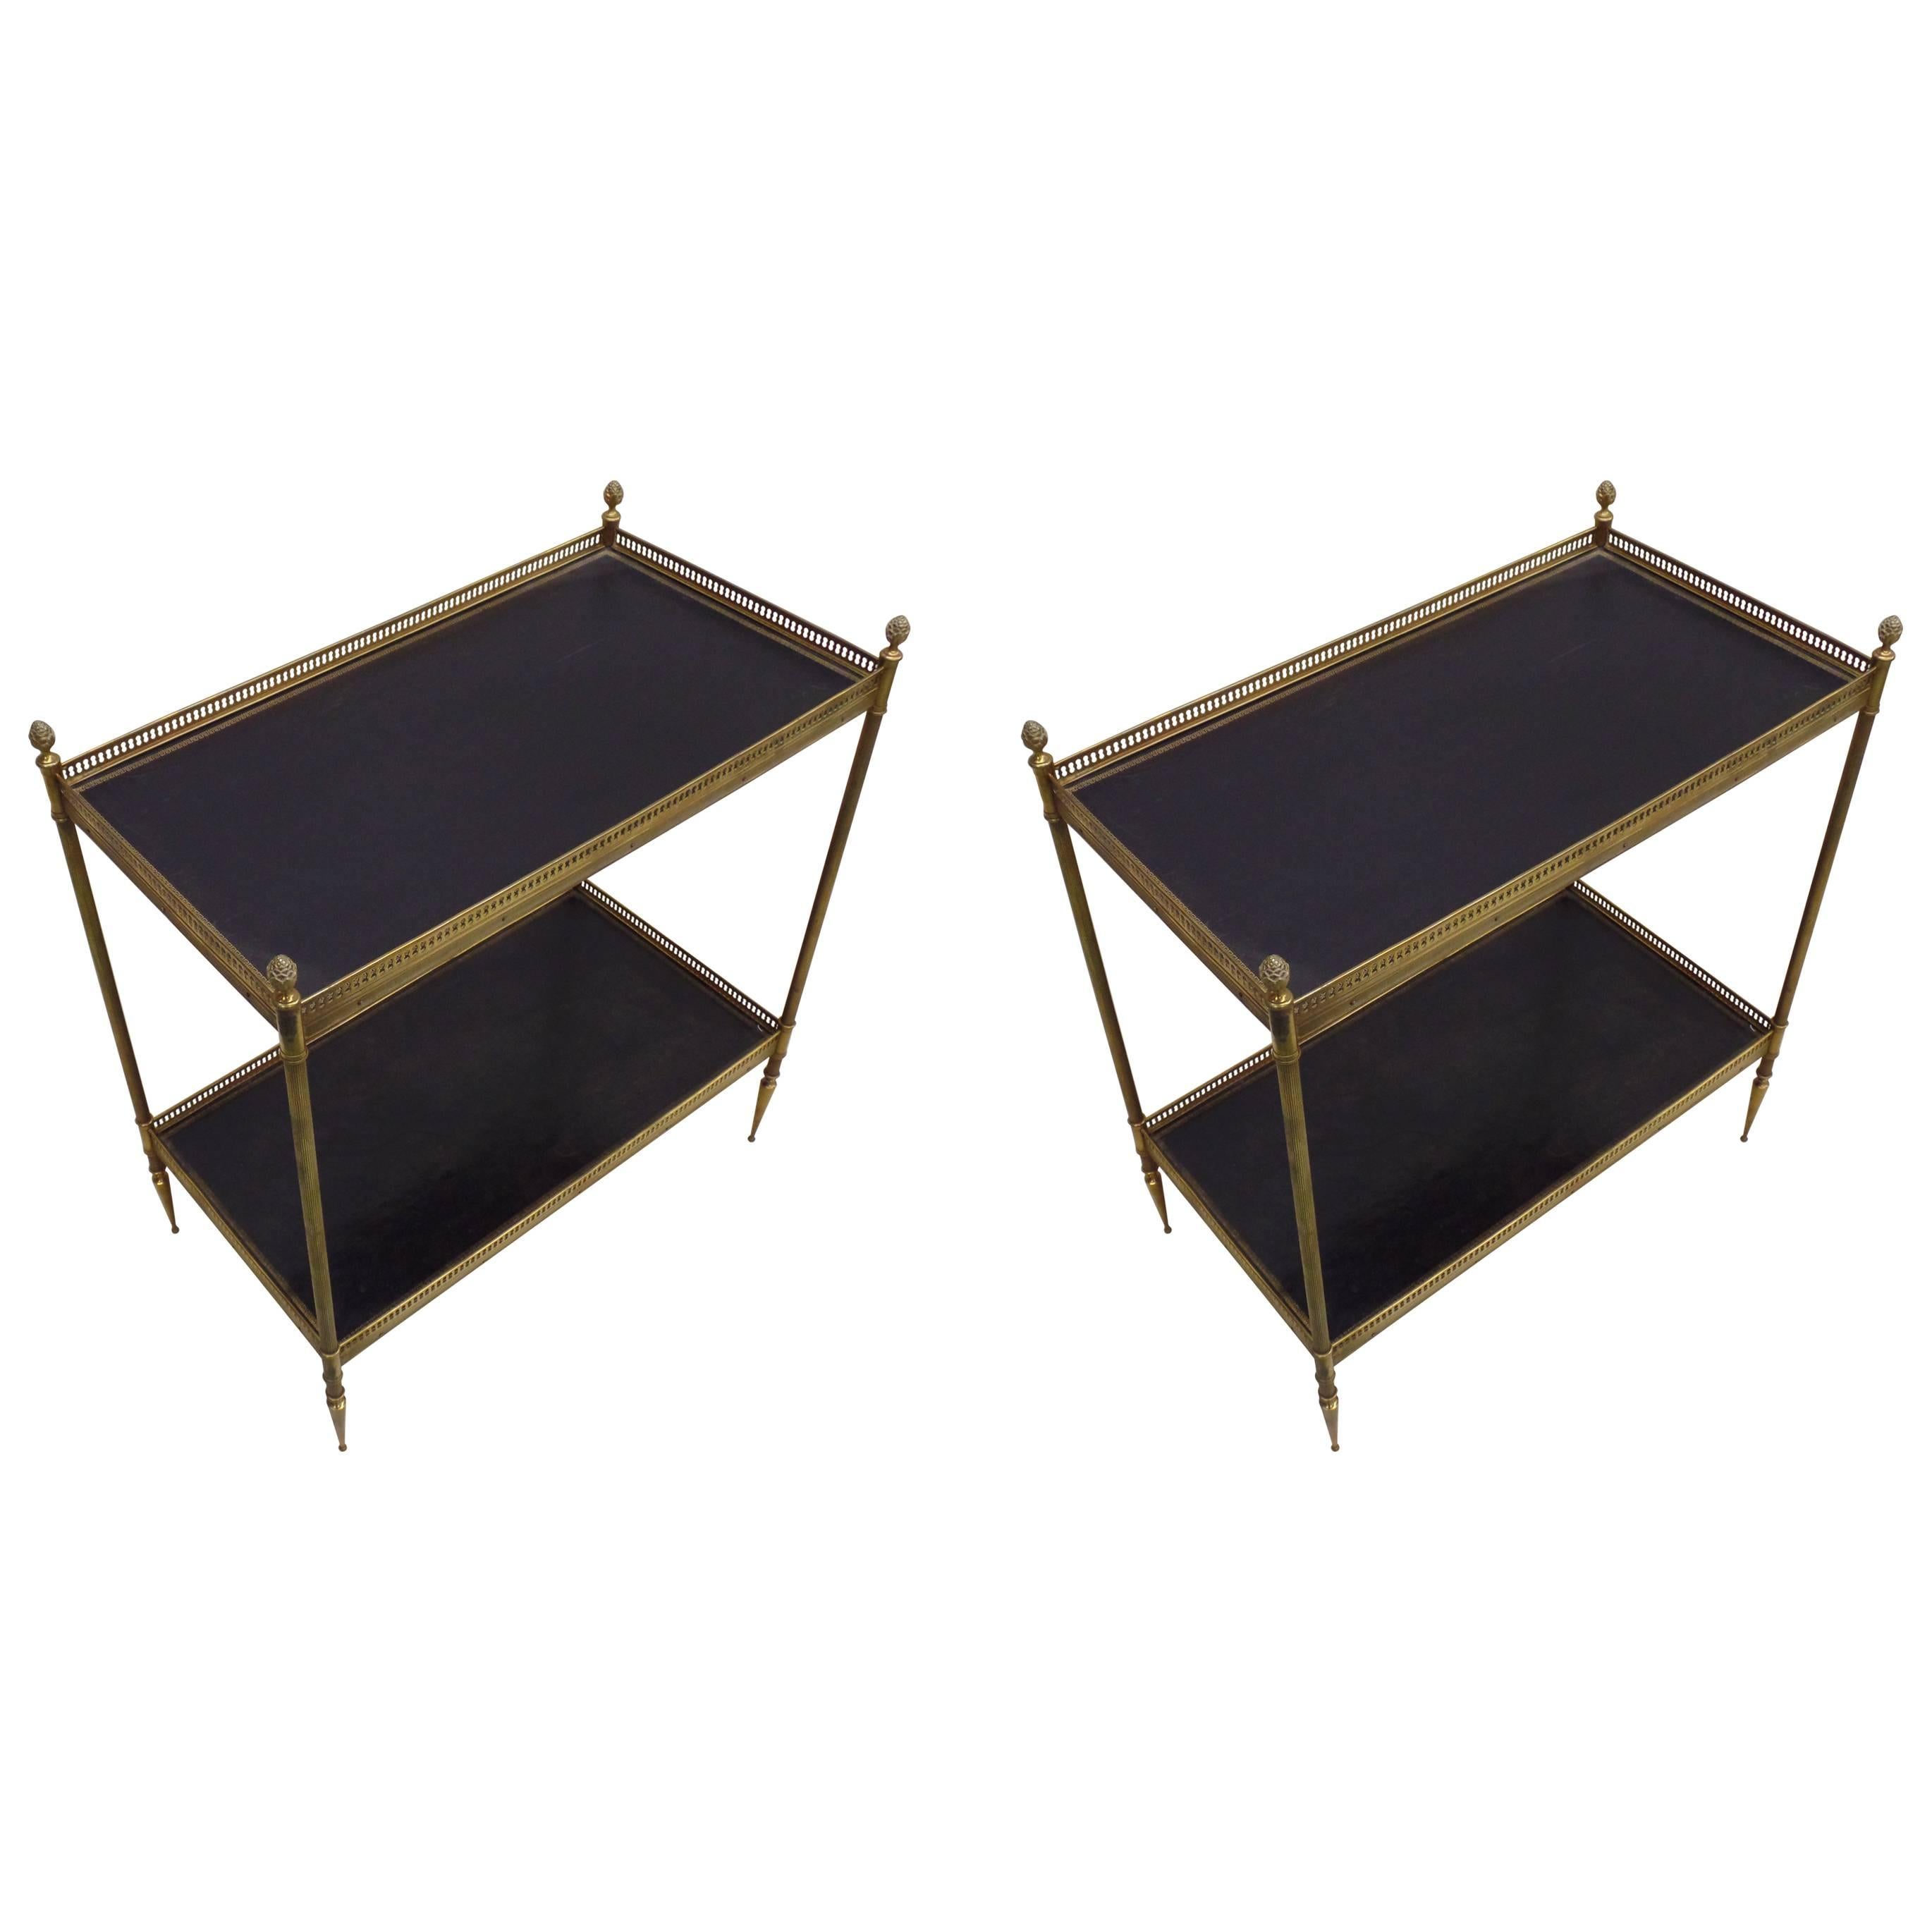 Iconic Pair of Double Level Side Tables by Maison Jansen